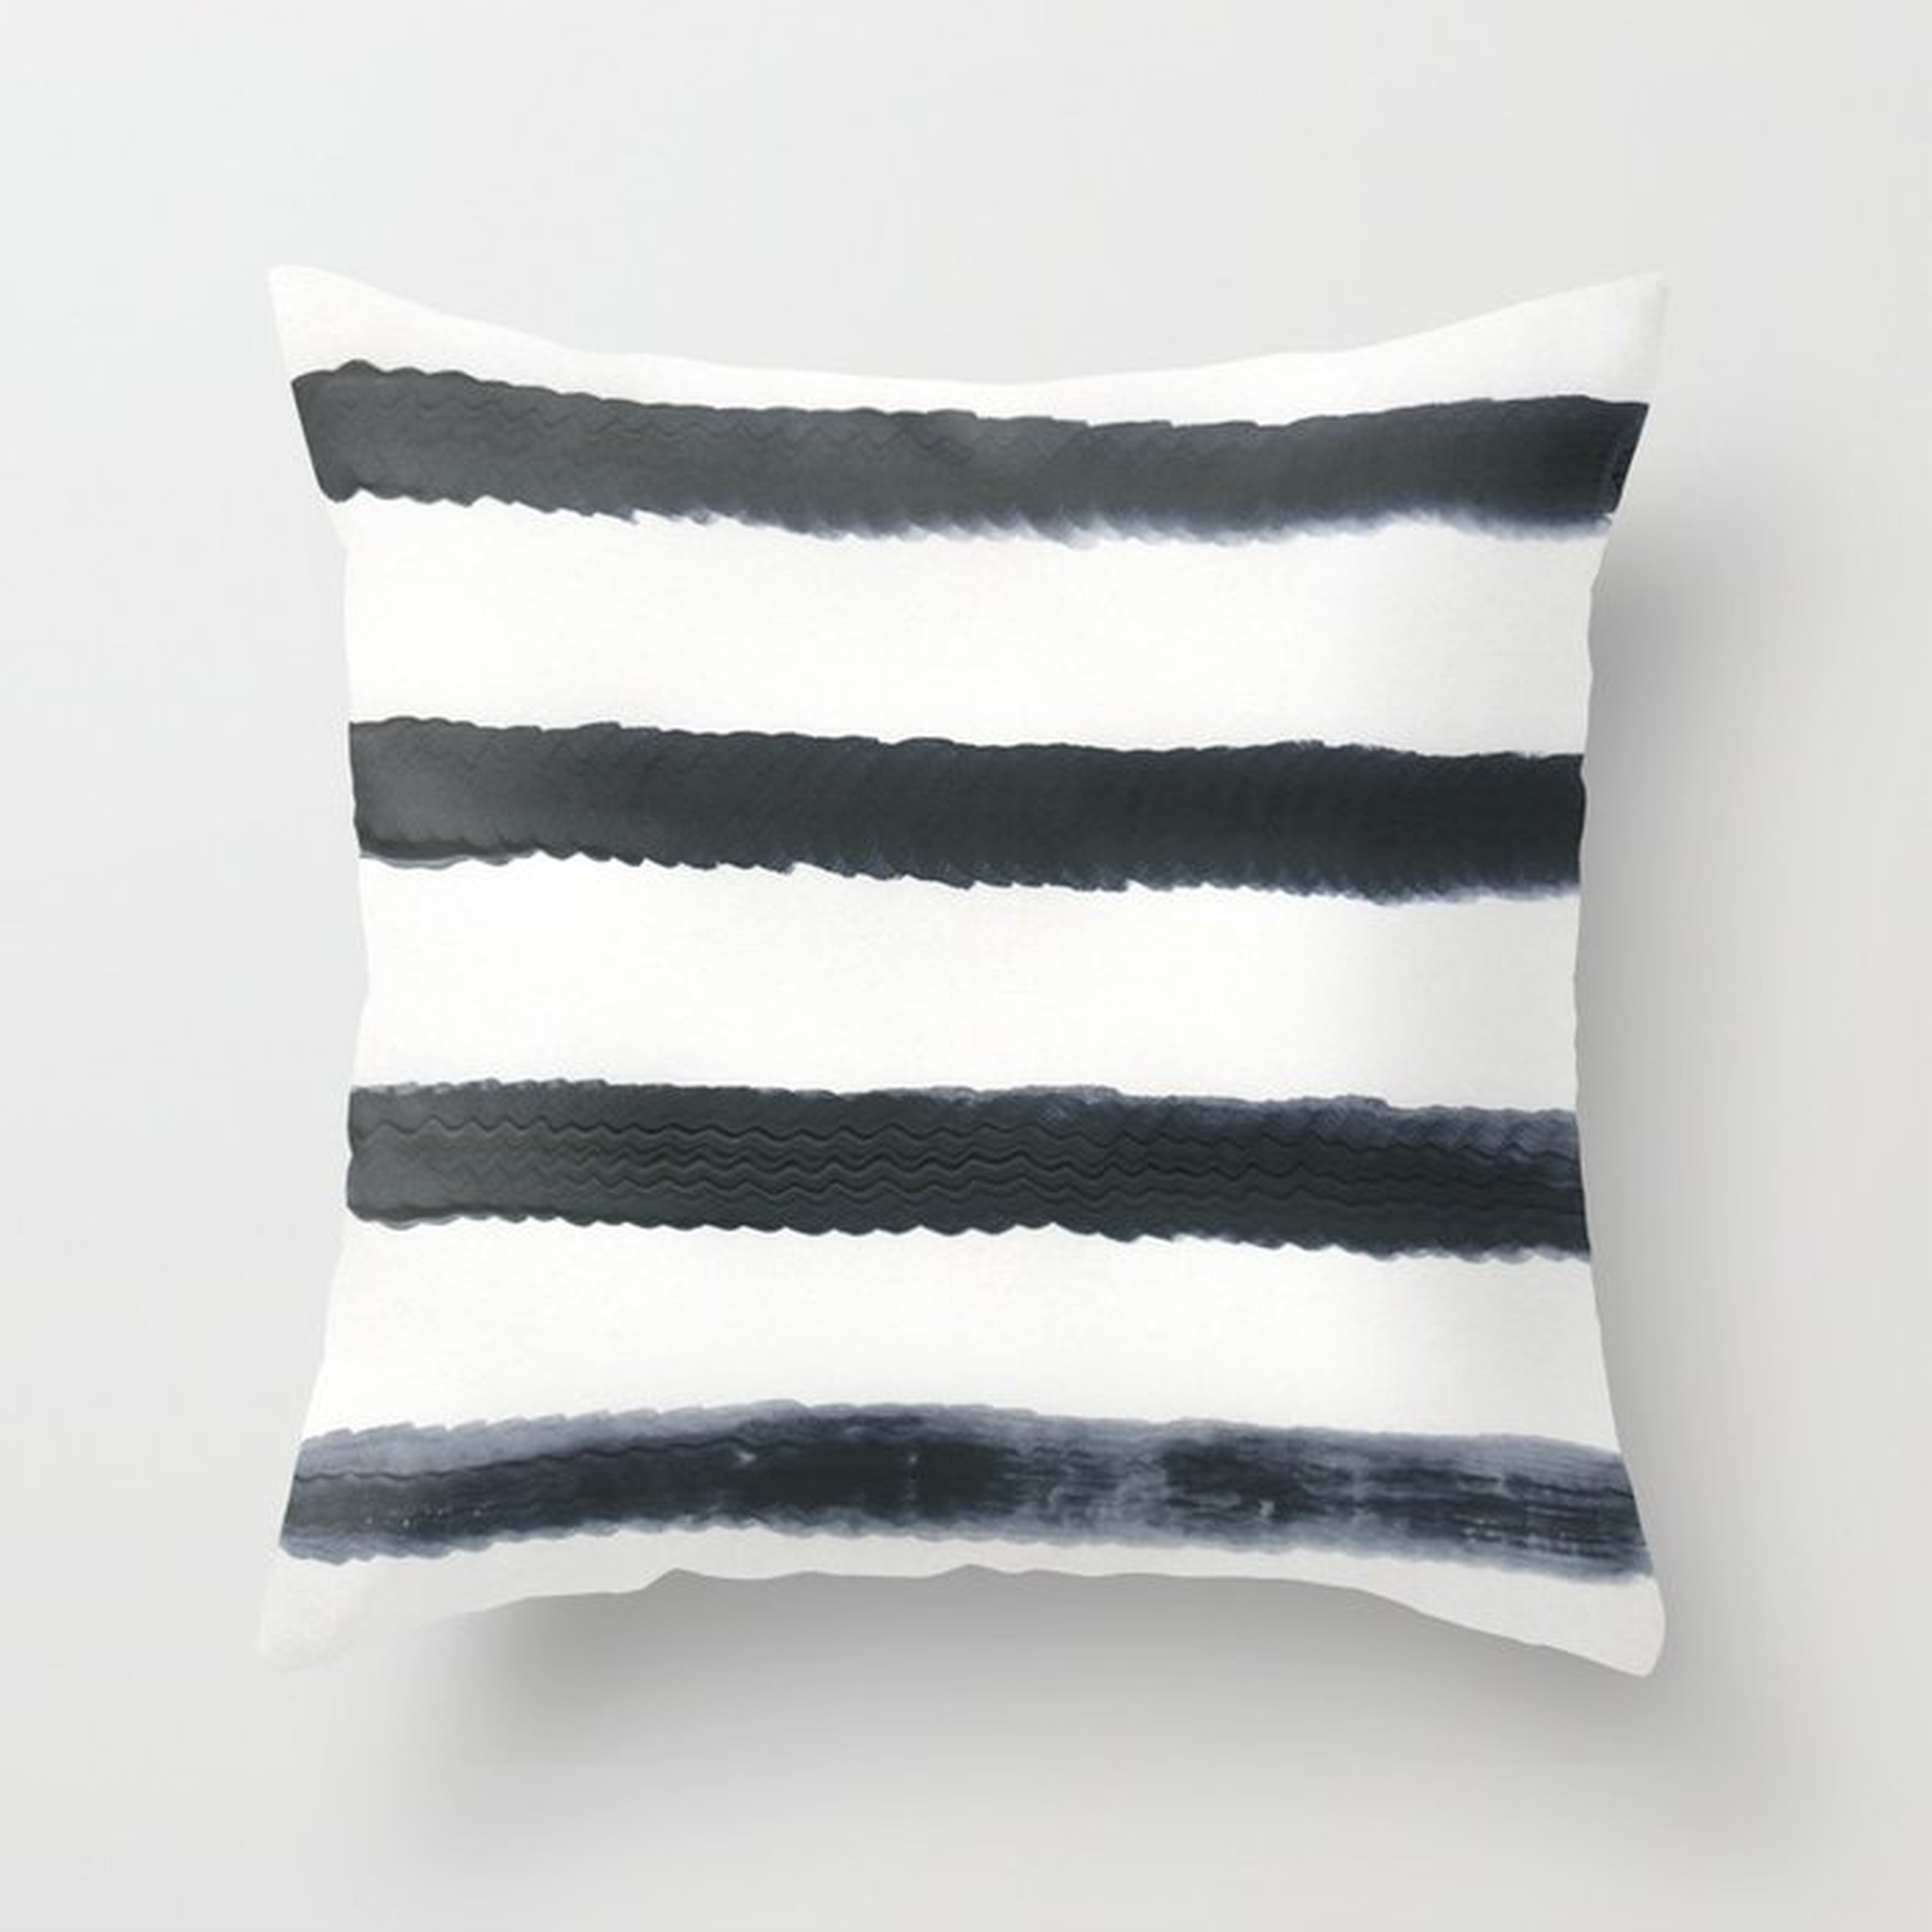 Black Wavy Stripes Throw Pillow by Georgiana Paraschiv - Cover (18" x 18") With Pillow Insert - Outdoor Pillow - Society6